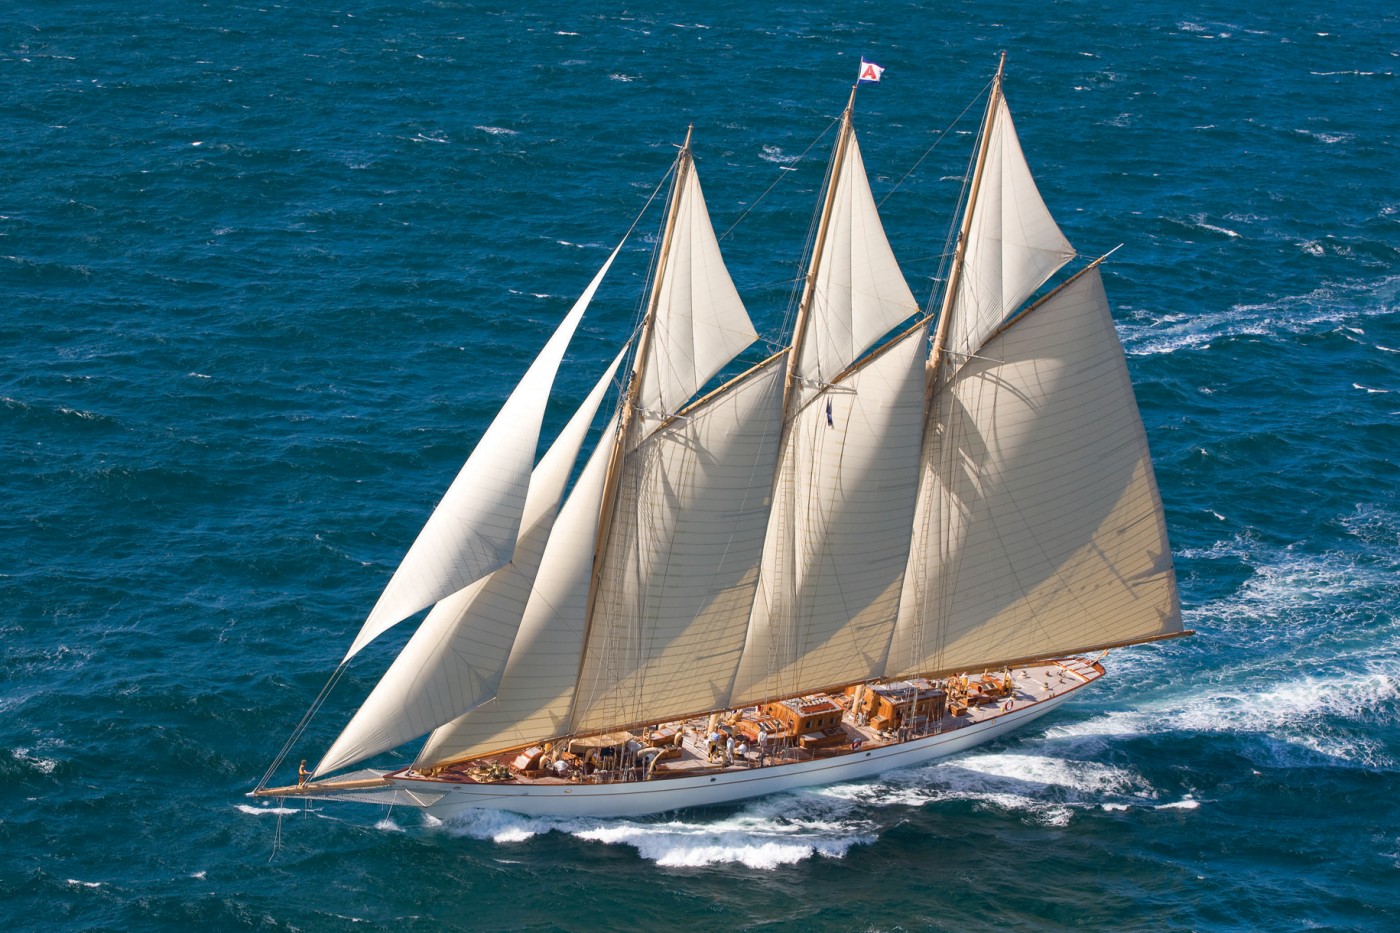 The beautifull 3 masted Schooner, Adix, the biggest boat in the race - photo Pendennis